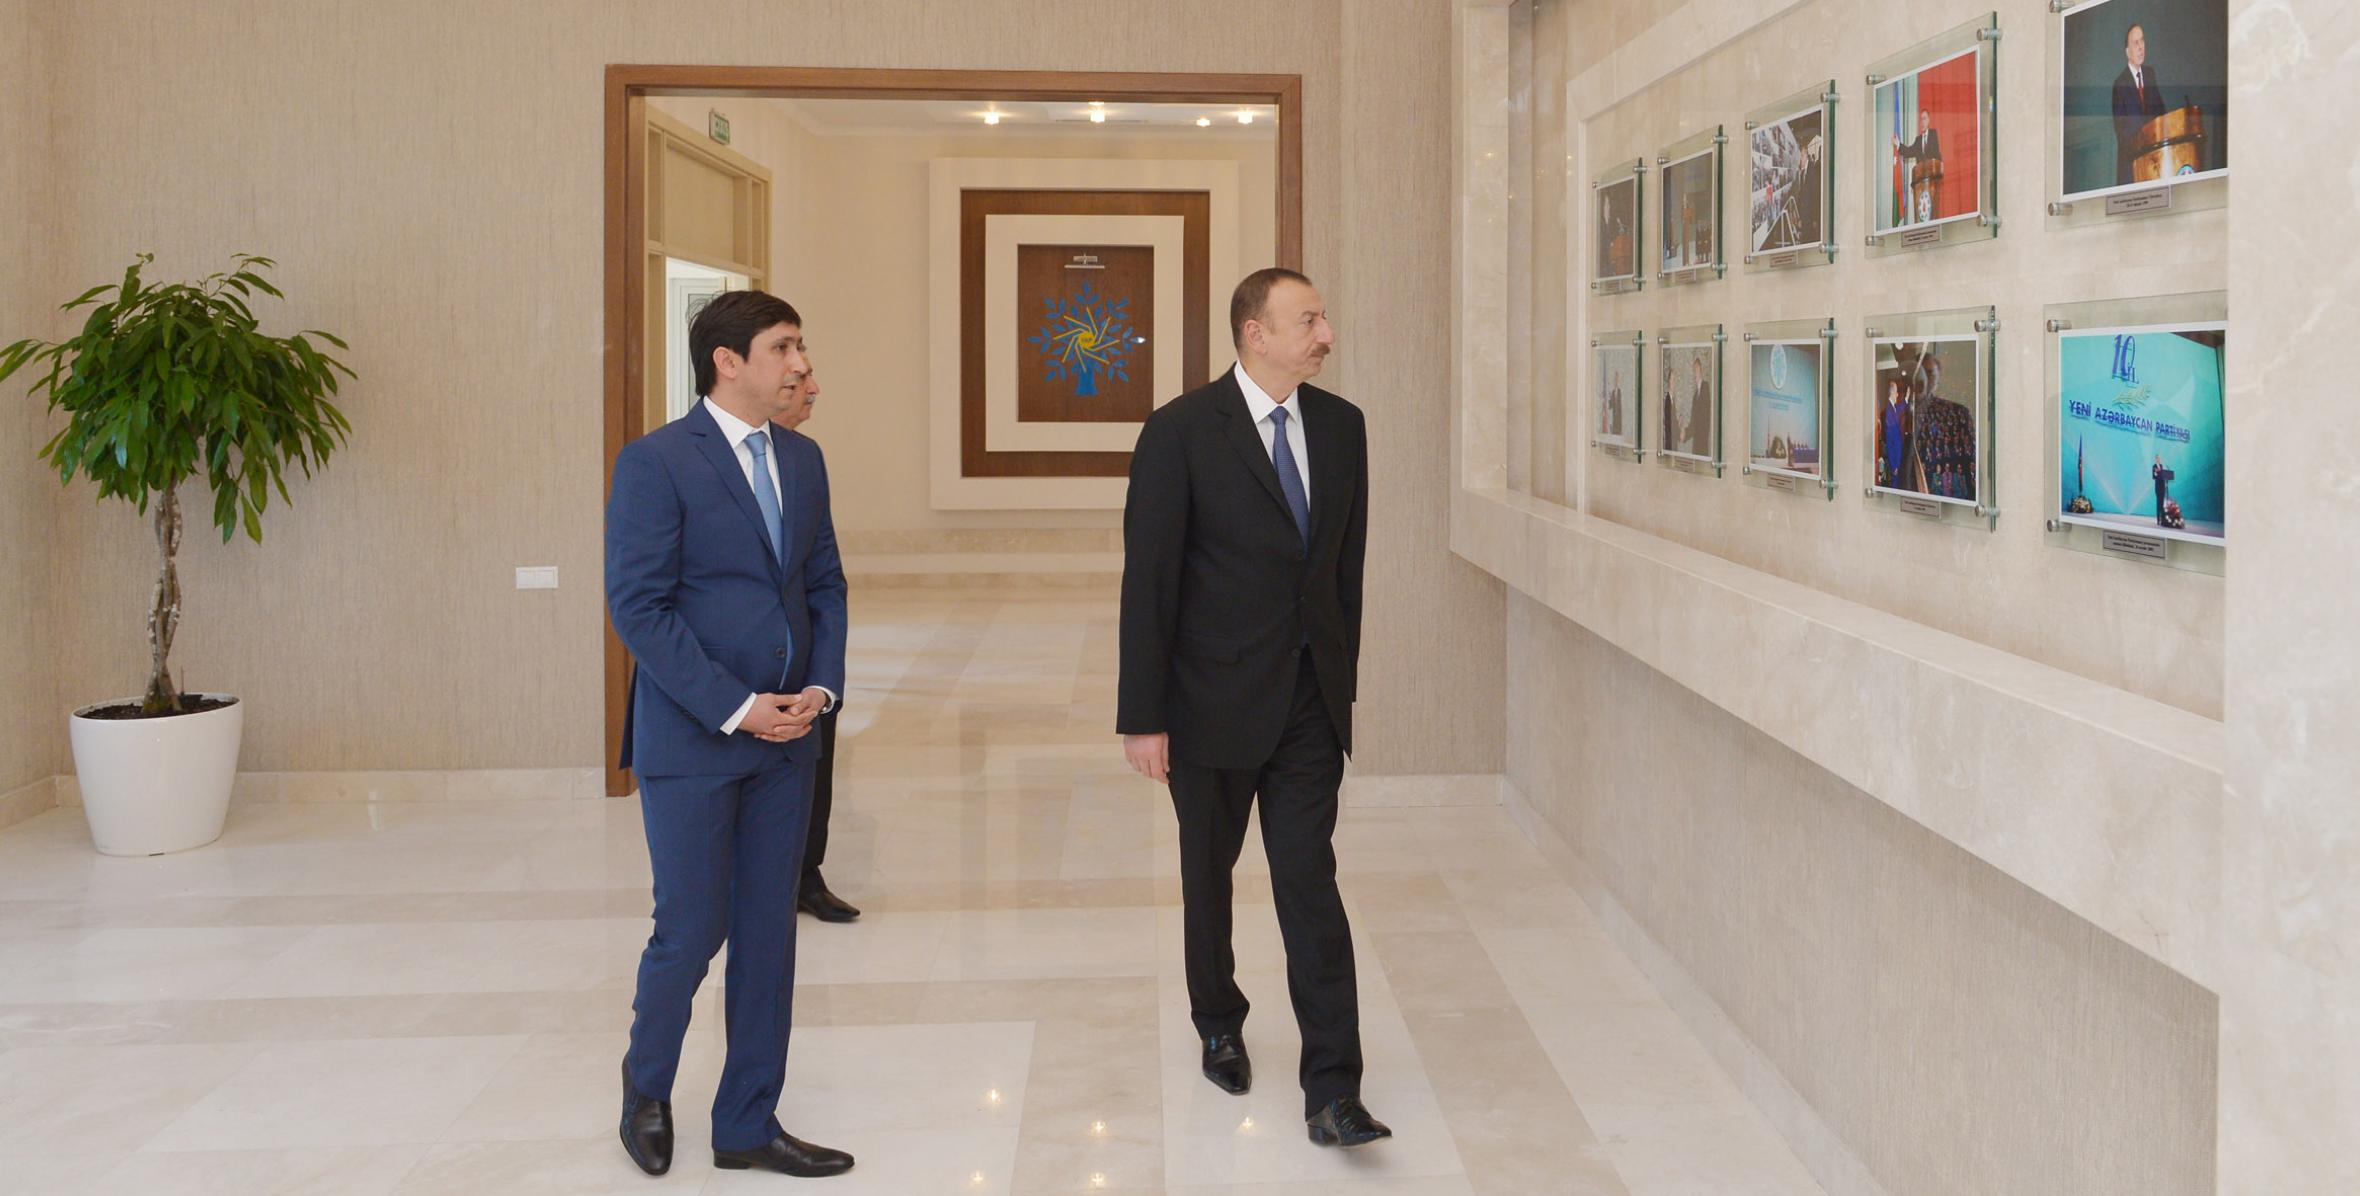 Ilham Aliyev attended the opening ceremony of a new office building of the Agdash District branch of the New Azerbaijan Party